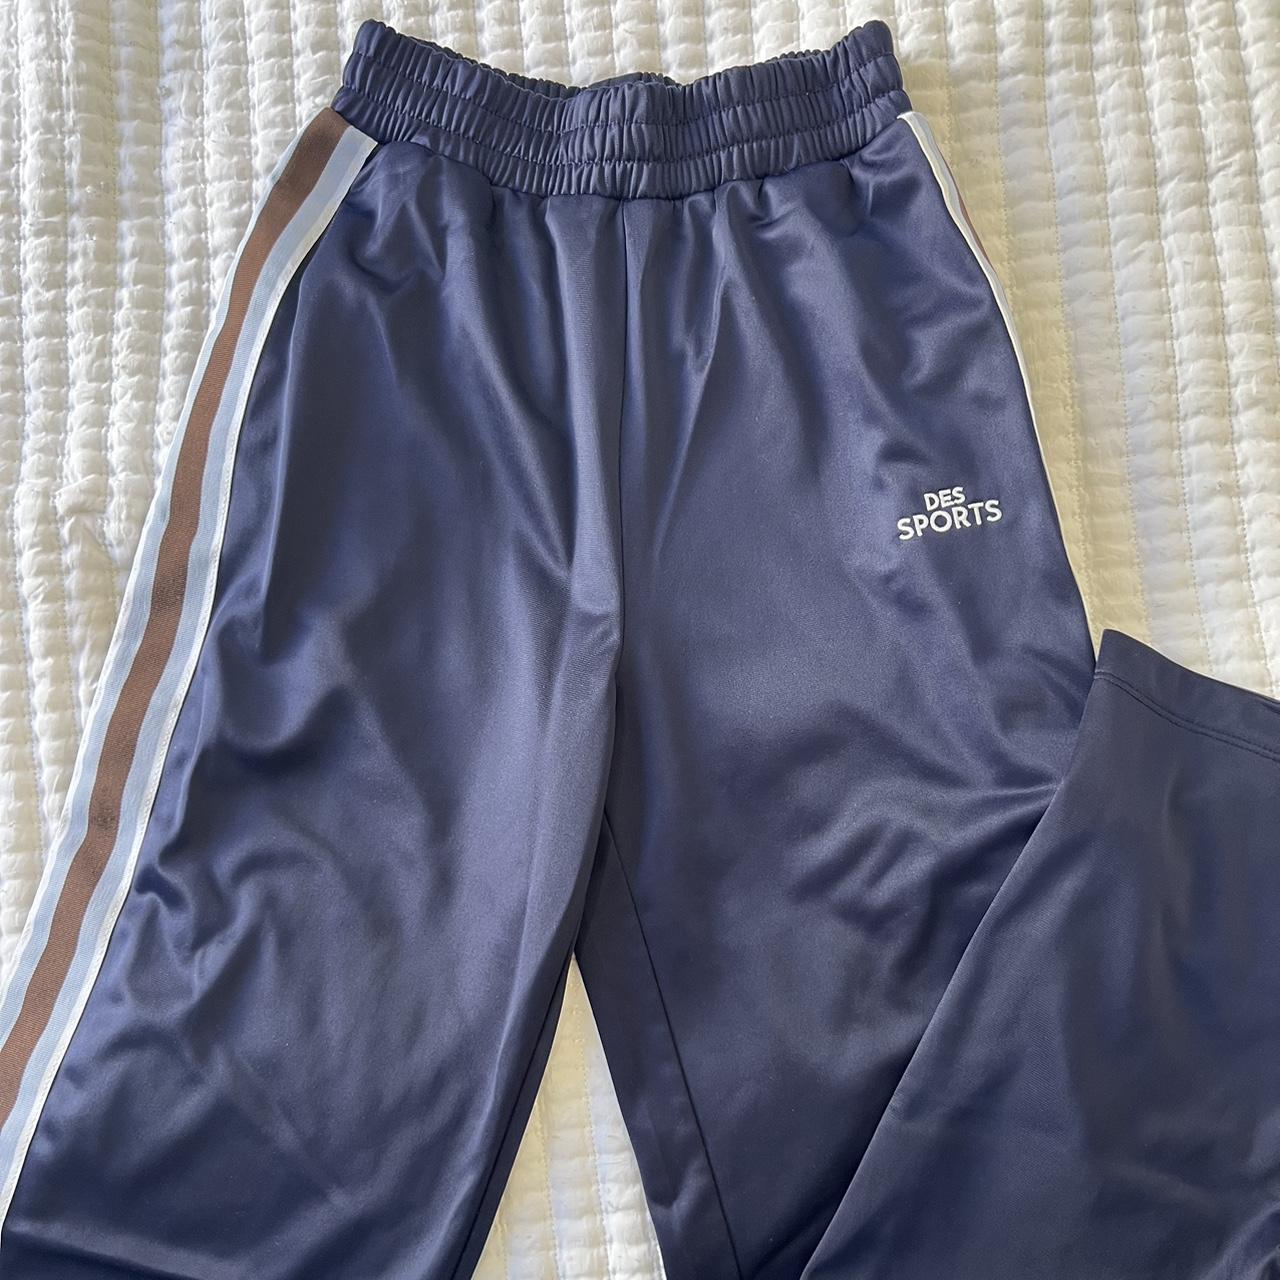 Navy blue track pants, only worn a few times size 2/4 - Depop